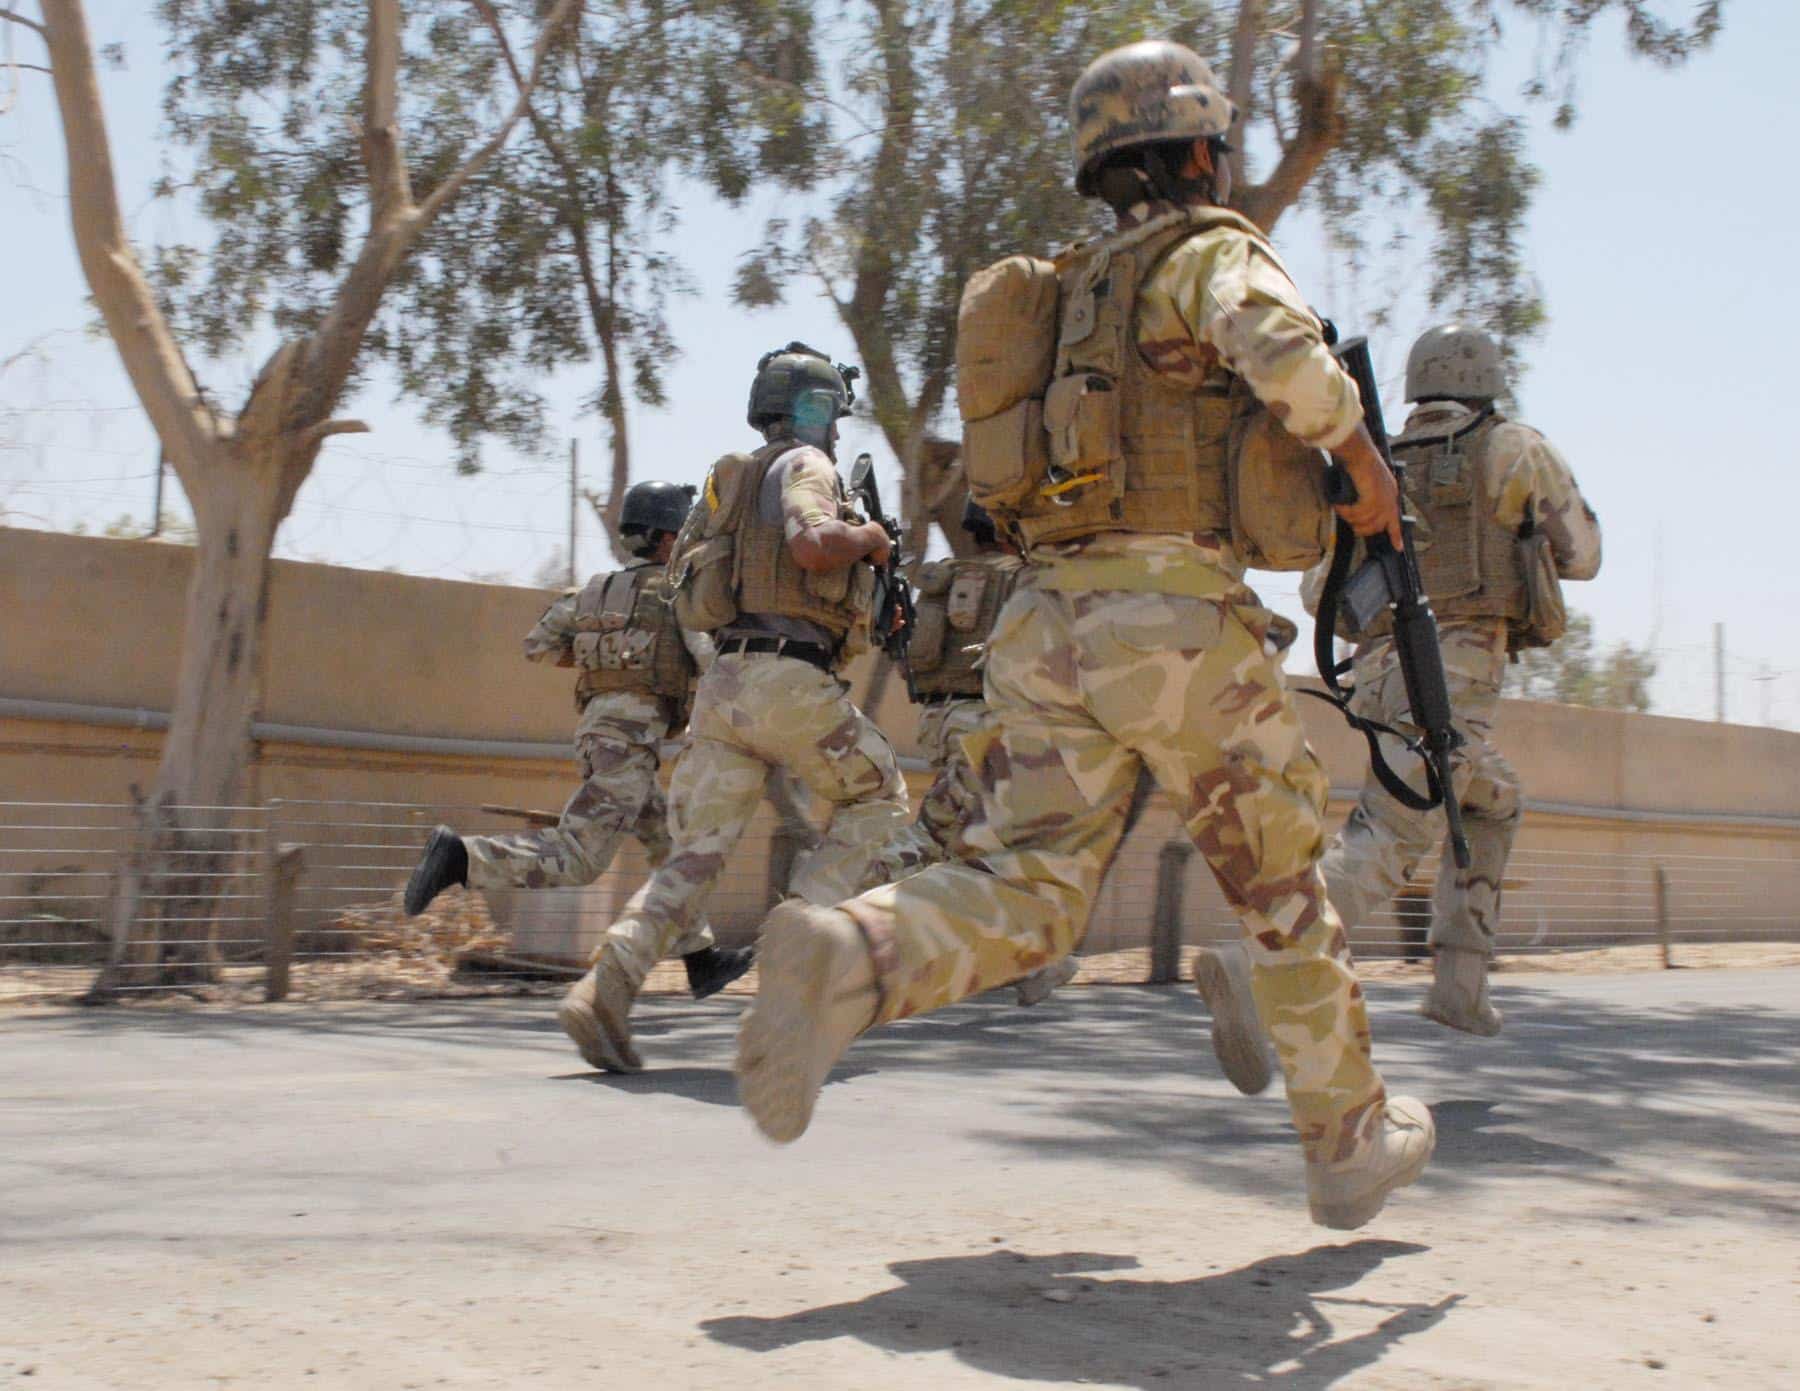 Iraqi Special Operations Forces soldiers in full combat gear sprint for approximately a quarter of a mile during the Special Forces Challenge that took place on a military base in the Baghdad area on June 2. The average Soldier carries about 60 pounds during routine patrols.